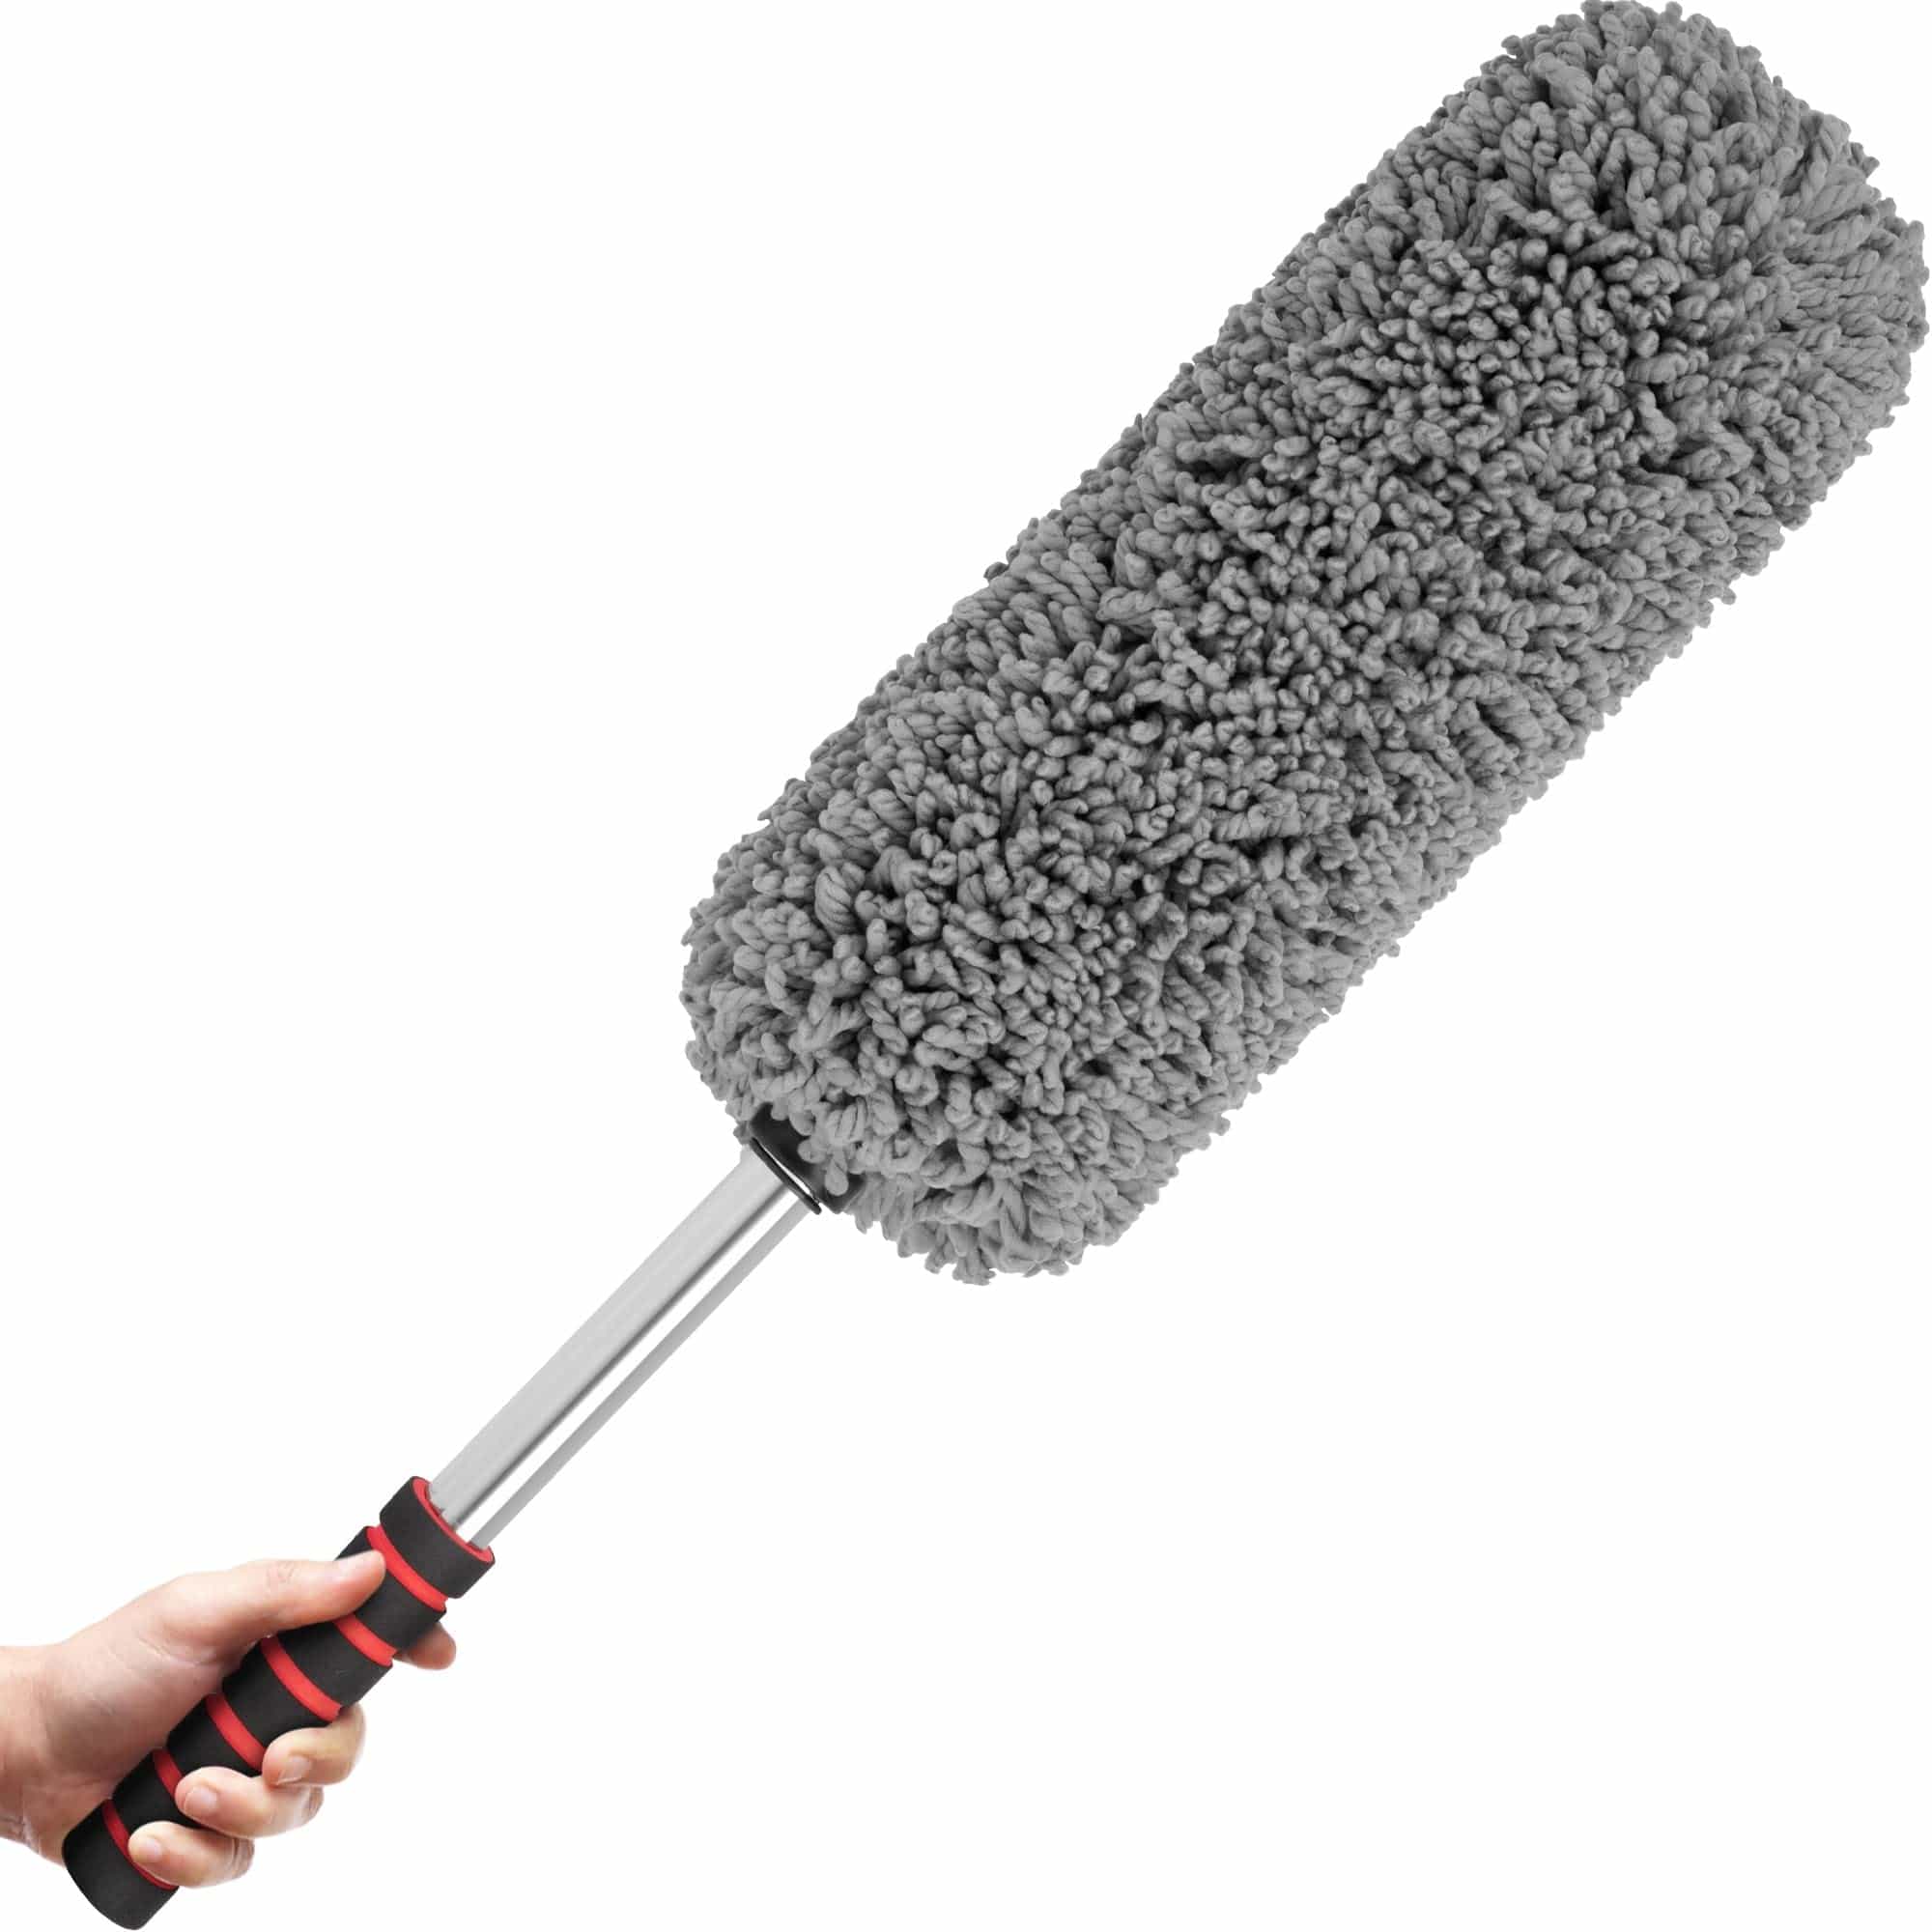 https://relentless-drive.com/cdn/shop/products/relentless-drive-car-duster-exterior-scratch-free-premium-microfiber-duster-for-car-long-secure-extendable-handle-removes-pollen-dust-lint-large-duster-for-car-truck-suv-rv-motorcycle_053babf8-02c8-4ab0-8074-2c2cd3dd656c_2000x.jpg?v=1679435367